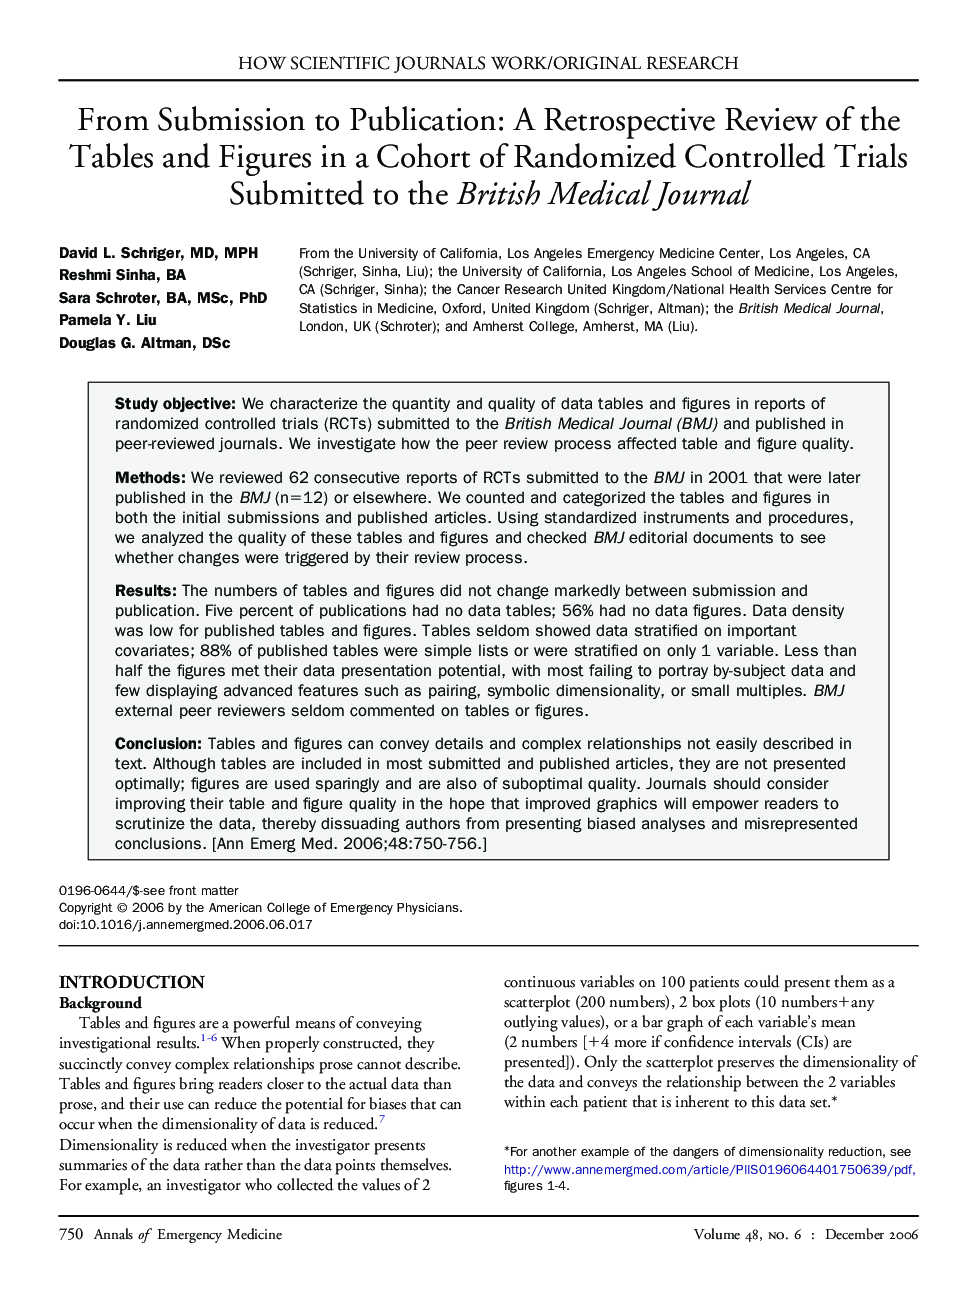 From Submission to Publication: A Retrospective Review of the Tables and Figures in a Cohort of Randomized Controlled Trials Submitted to the British Medical Journal